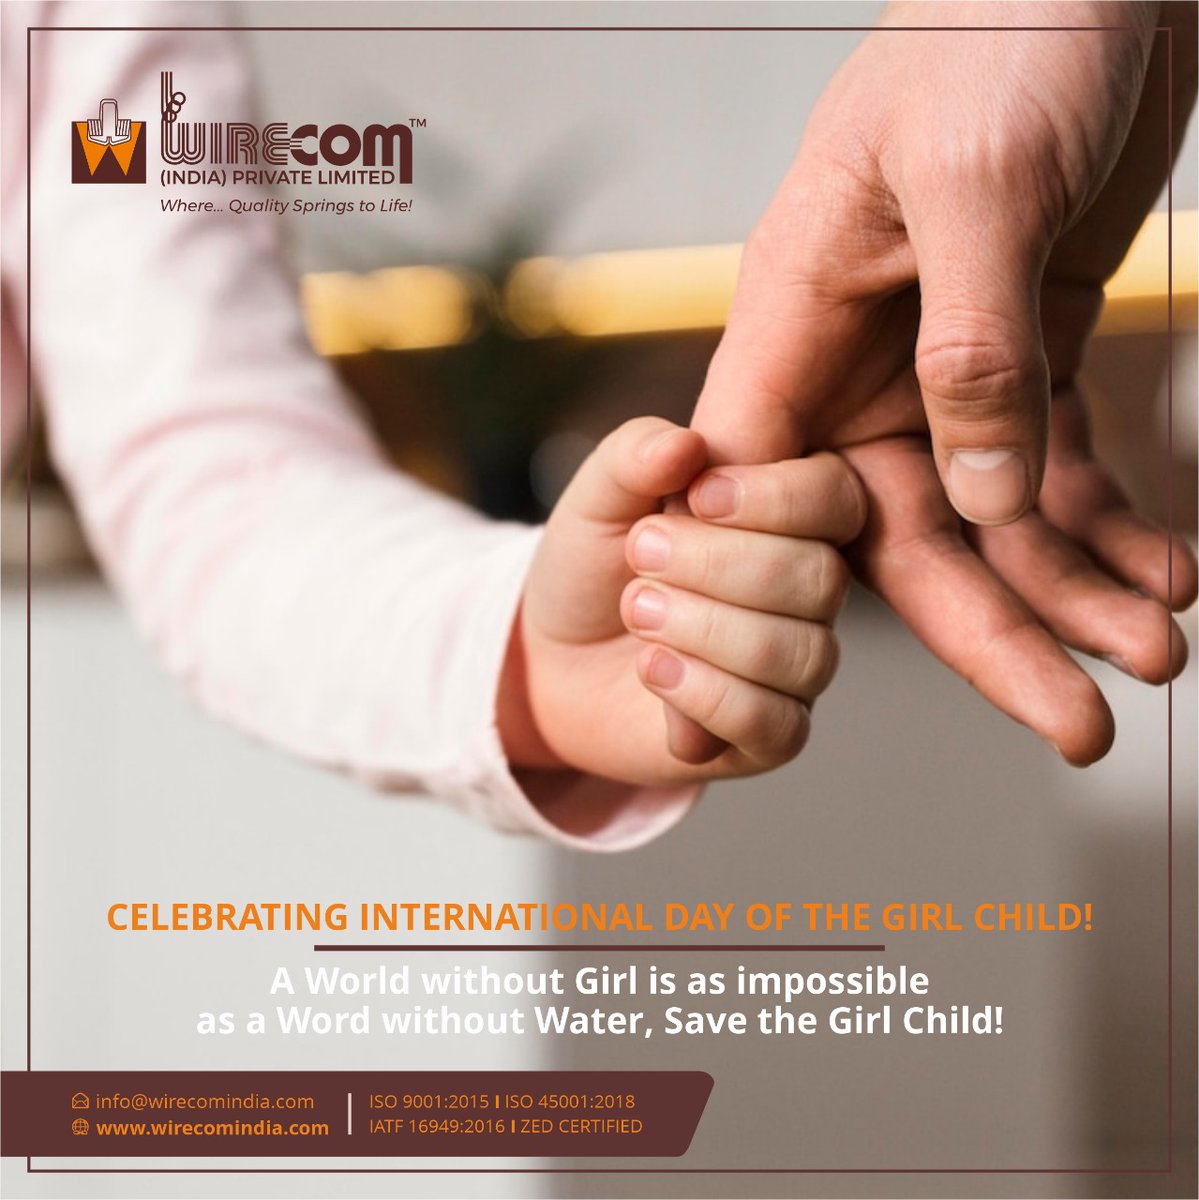 A happy and healthy girl child with a safe and progressive environment is what we all dream of. 
#WirecomIndia wishes you a very Happy International Girl Child Day!

#InternationalDayOfGirlChild #GirlChildDay #girlchild #girlpower #womenswelfare #trending #spring #springsolution